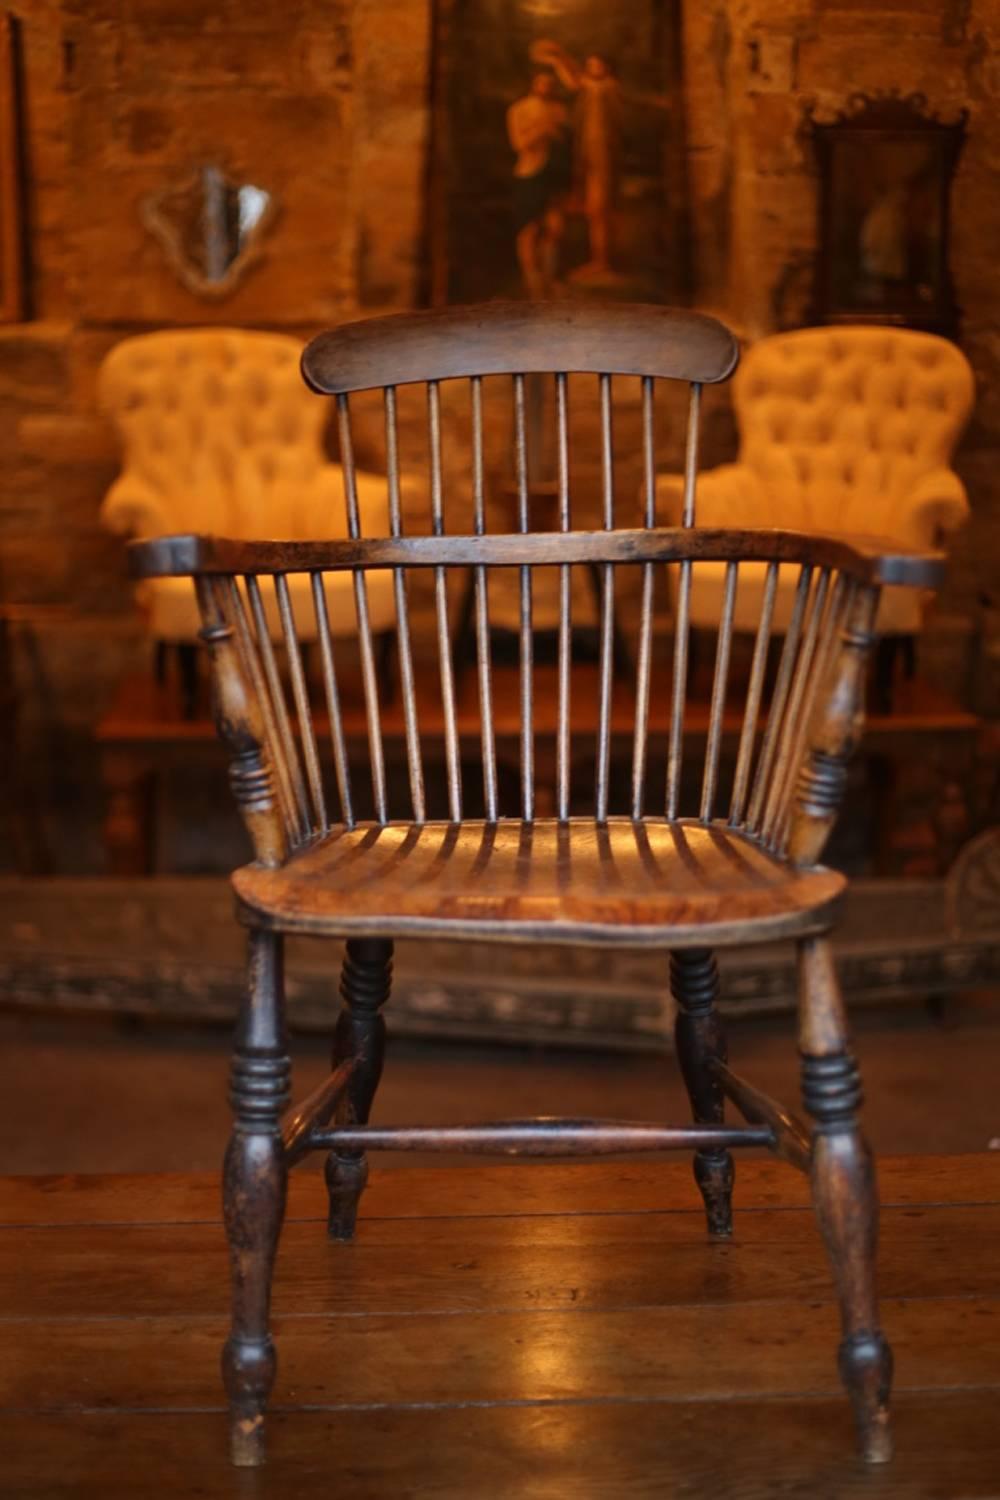 This is a gorgeous and rare designed late 18th-early 19th century Windsor armchair. I have not seen many with this stylish design before and this is by far the best condition one. There is no weakness or movement and it retains a lot of the original